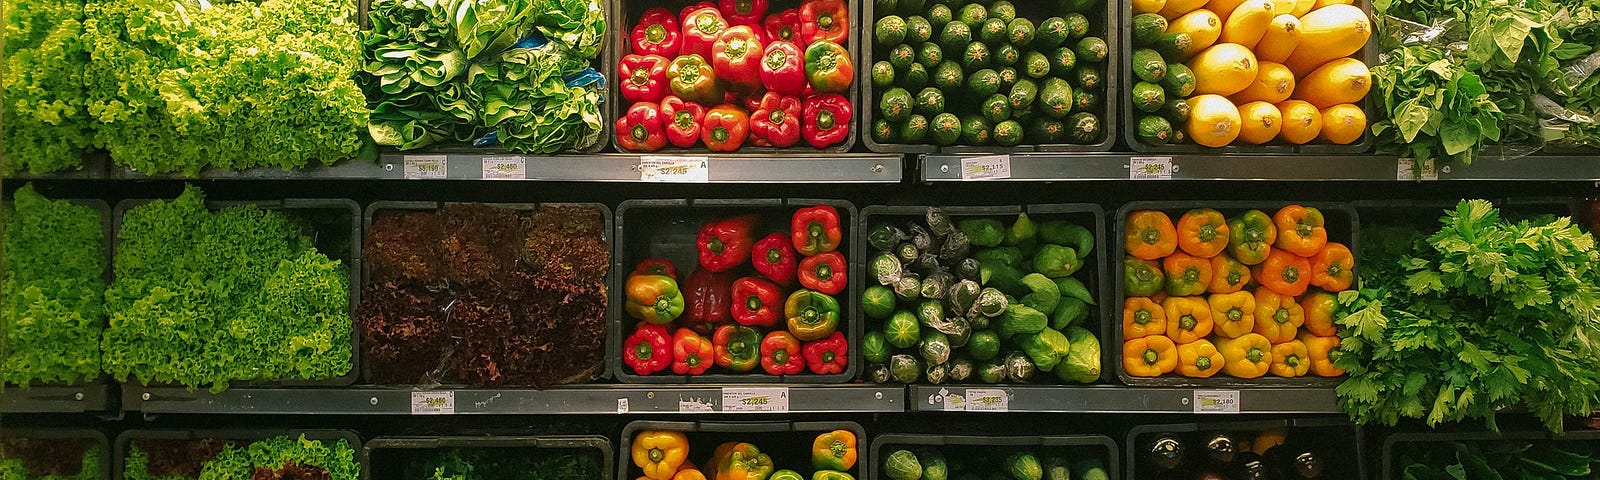 A supermarket produce shelf stocked with vegetables including lettuce, capsicum, zucchini, eggplant and pumpkin. Photo: nrd on Unsplash